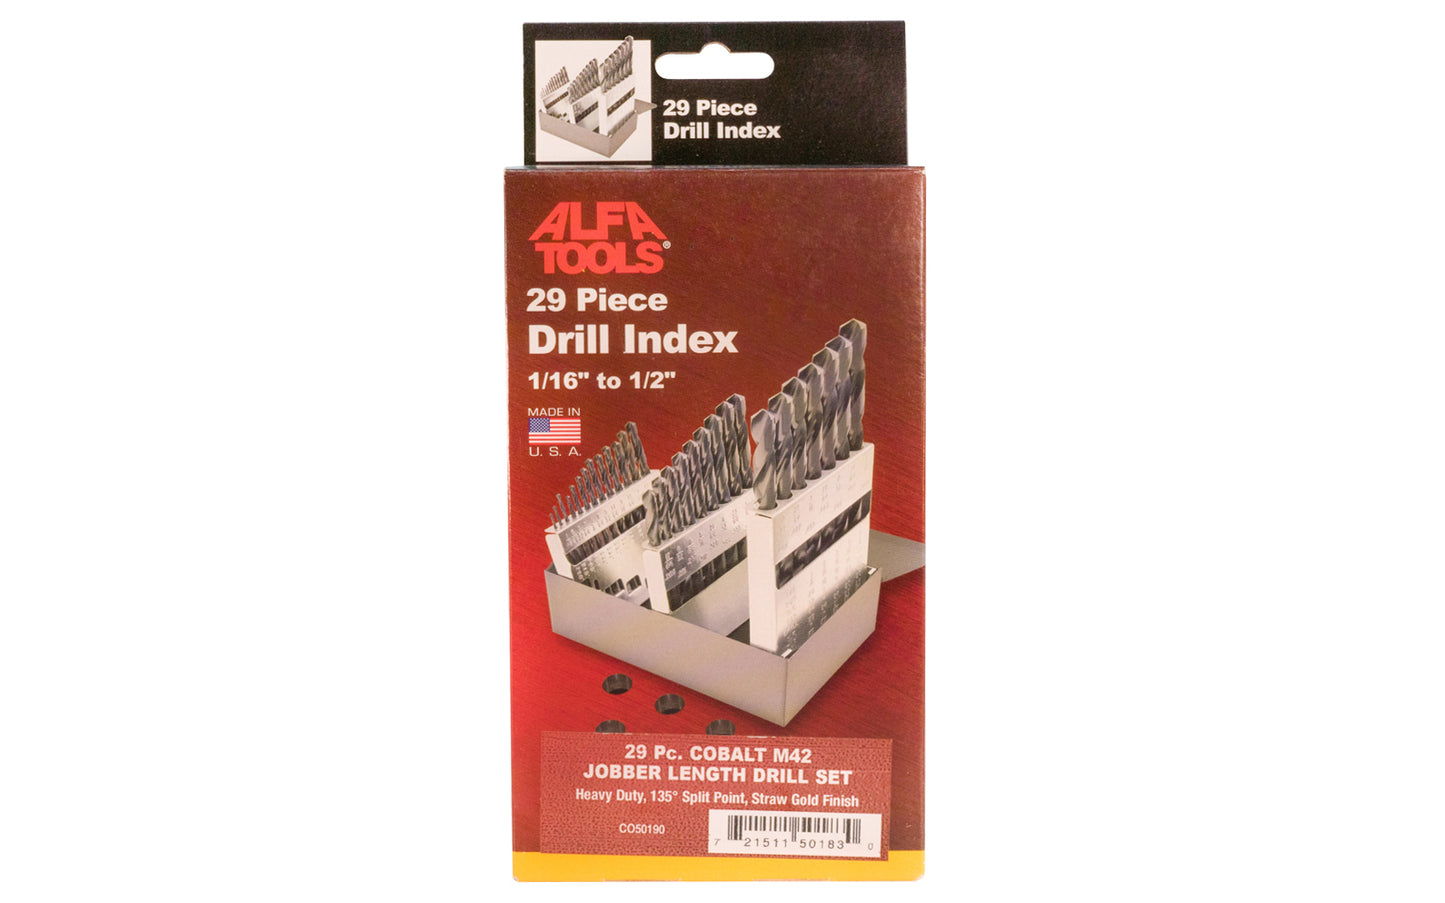 29-Piece Cobalt Drill Index - 1/16" to 1/2" by 64ths. Their heat-resistant & heavy duty design enables use in the harder, high tensile strength steels like stainless, titanium, armor plate, inconel & other difficult to machine materials. Cobalt Steel M42. Drill Bit Set. Made in USA.